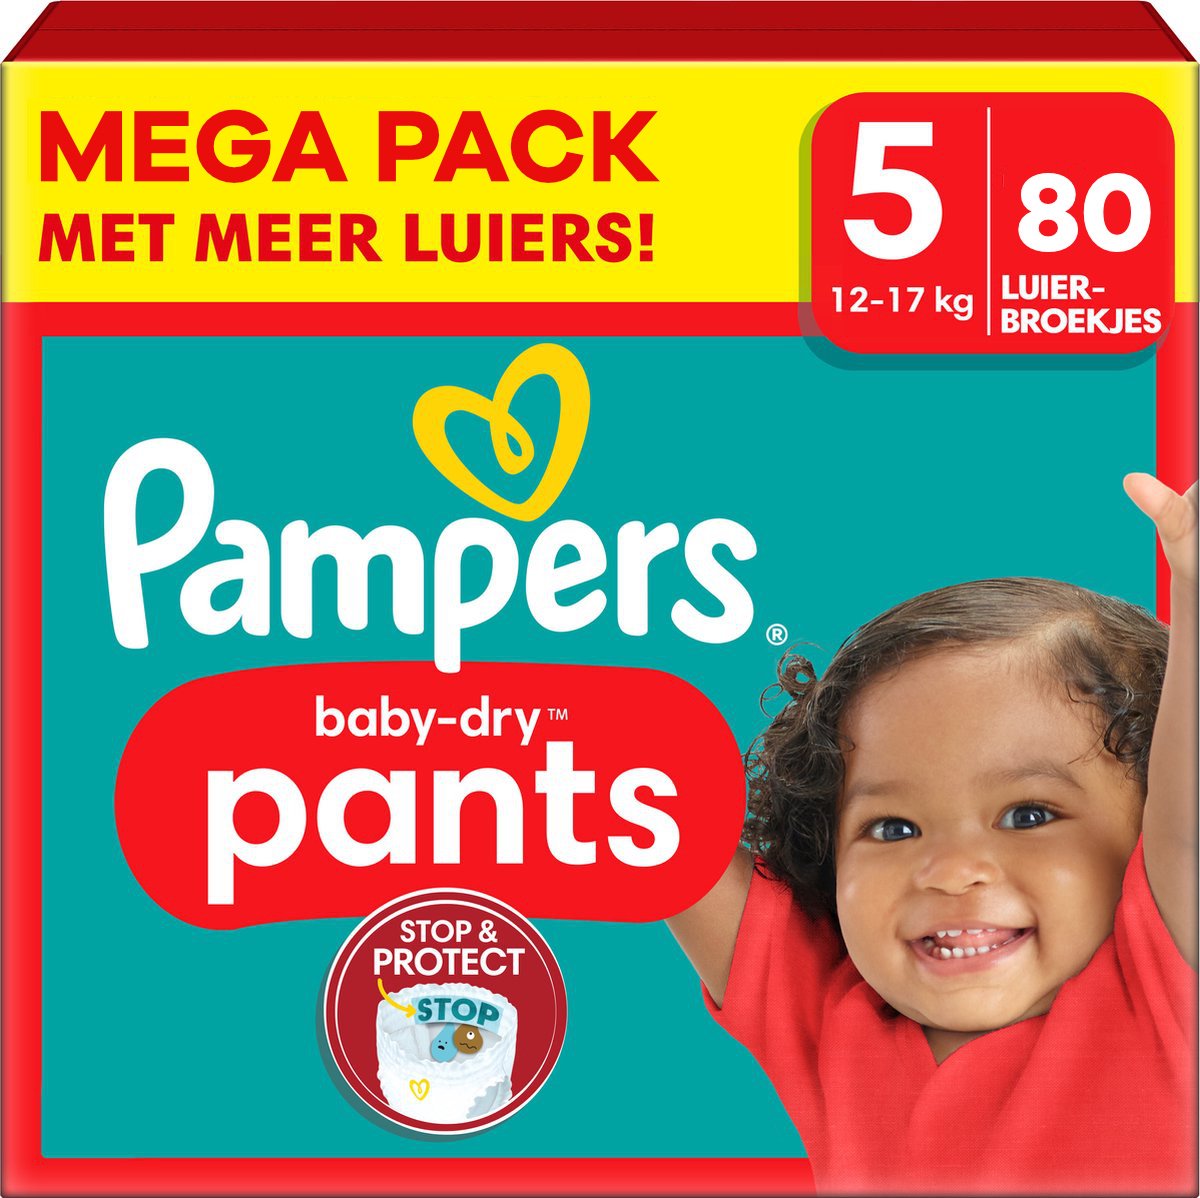 Paquet de couches Pampers Baby Dry Mega Pack - Taille 2 à 6 (via